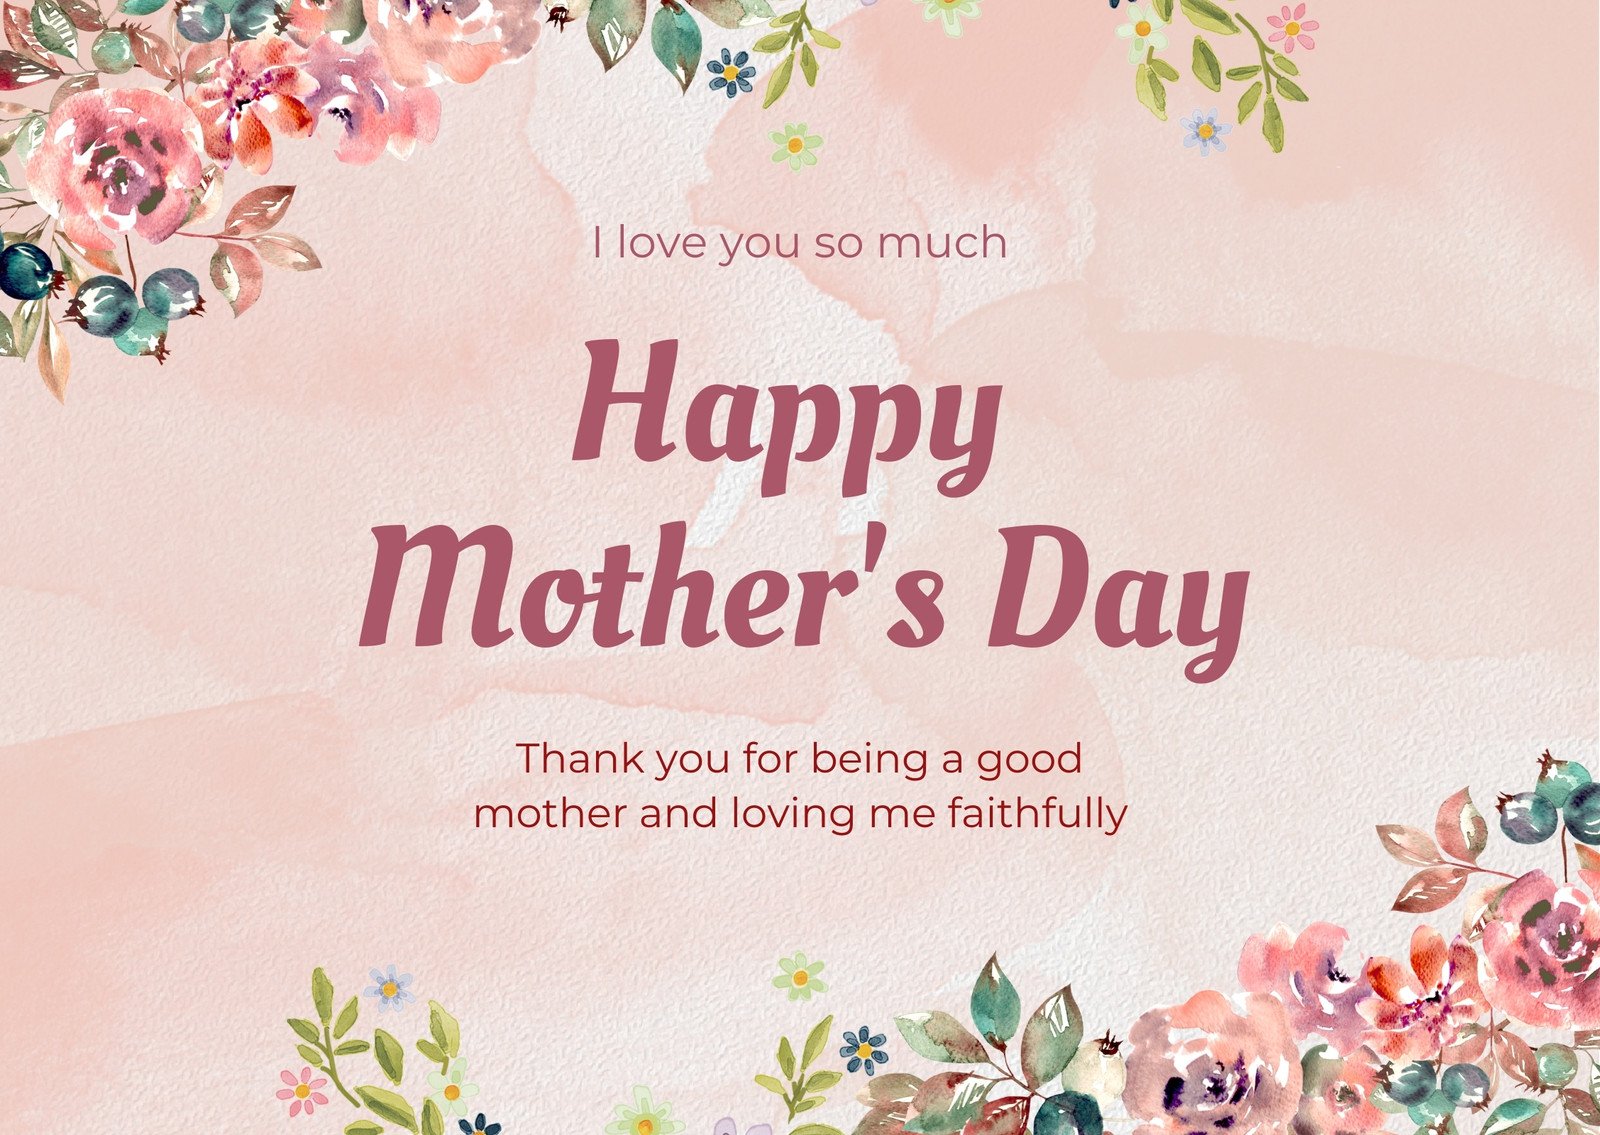 Canva Pink Watercolor Funny Mother's Day Card PNR05fusfC0 